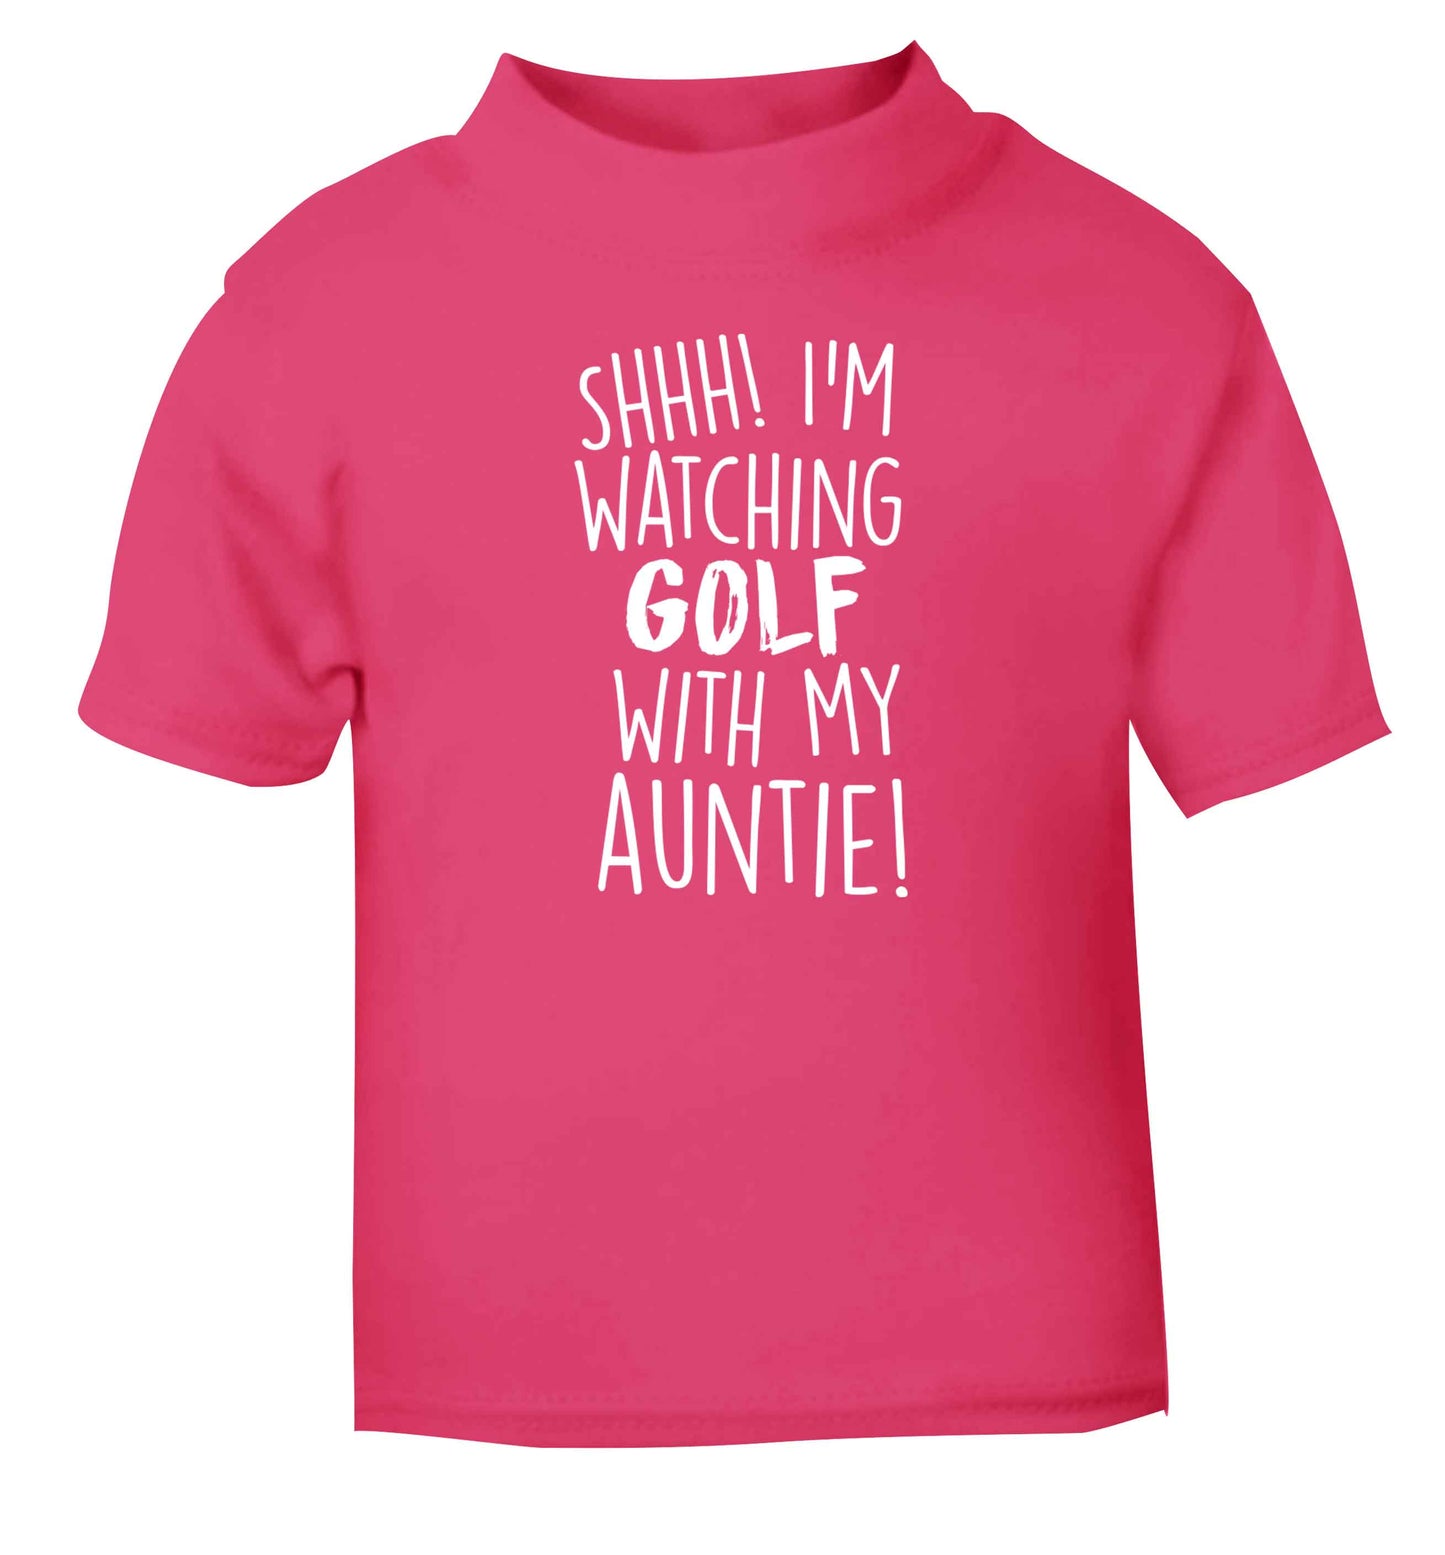 Shh I'm watching golf with my auntie pink Baby Toddler Tshirt 2 Years